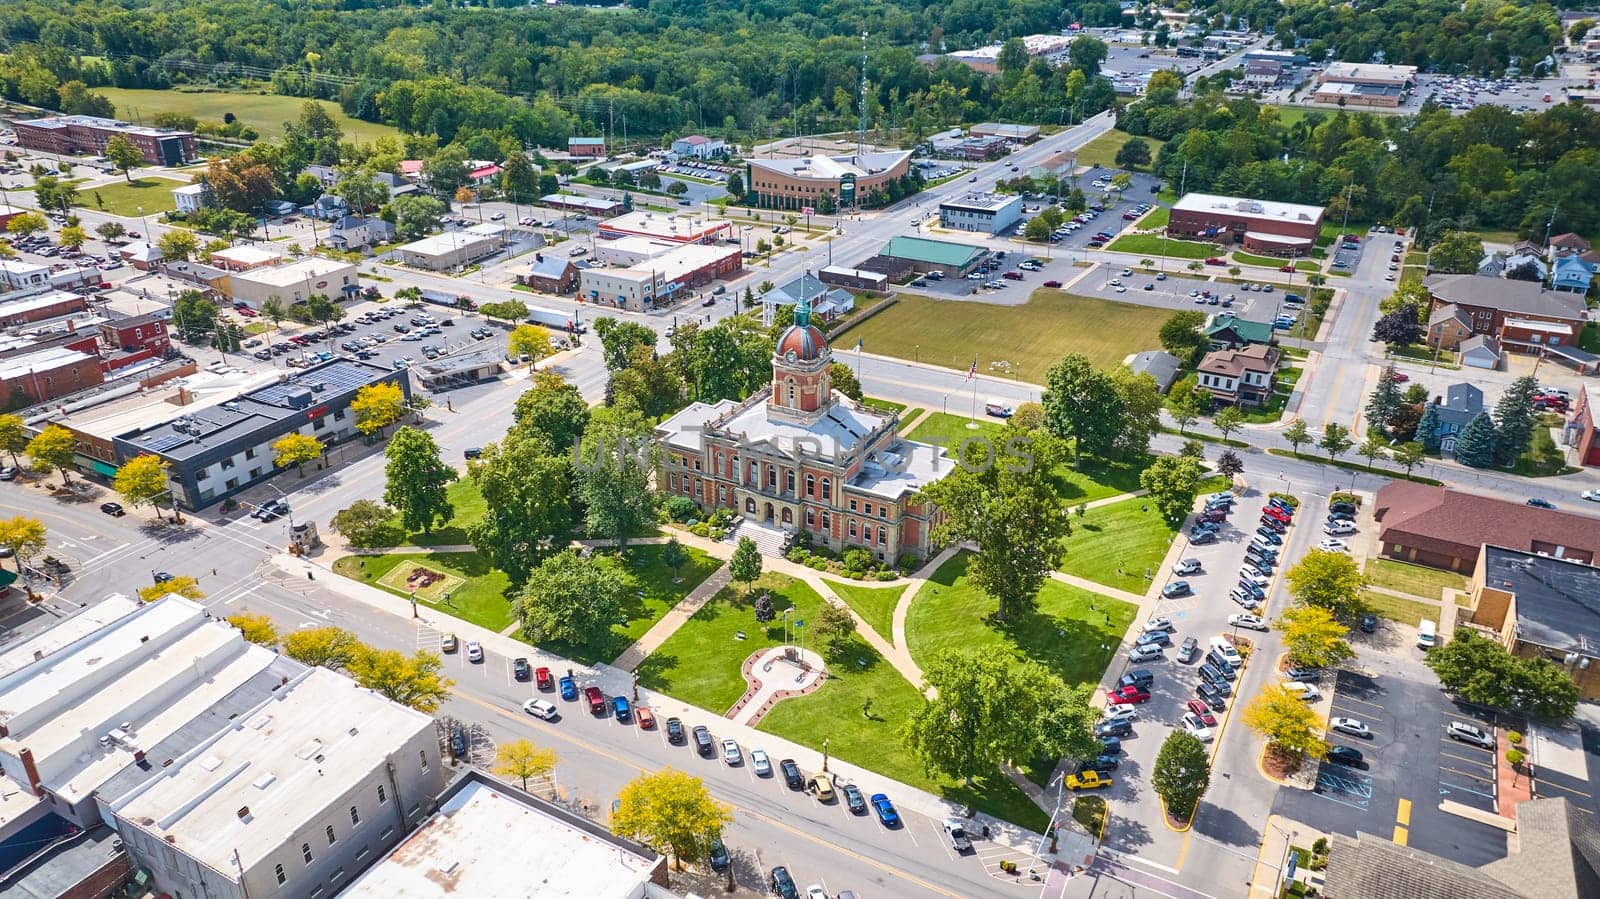 Aerial View of Elkhart Courthouse Amidst Small Town Greenery by njproductions